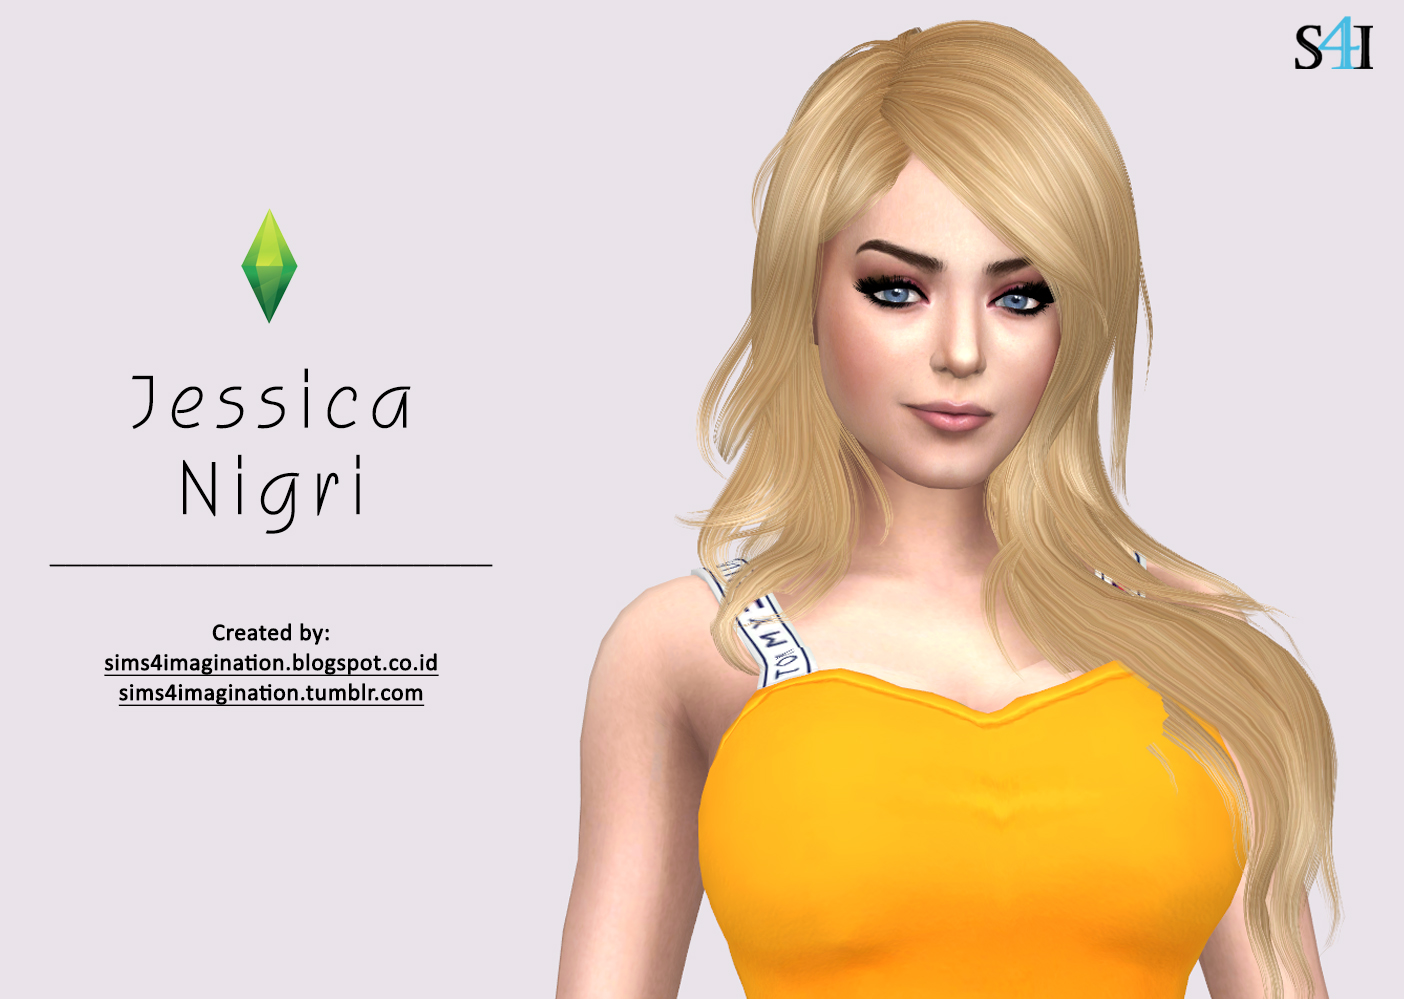 Sims of Jessica Nigri (born August 5, 1989) is an American cosplay celebrit...